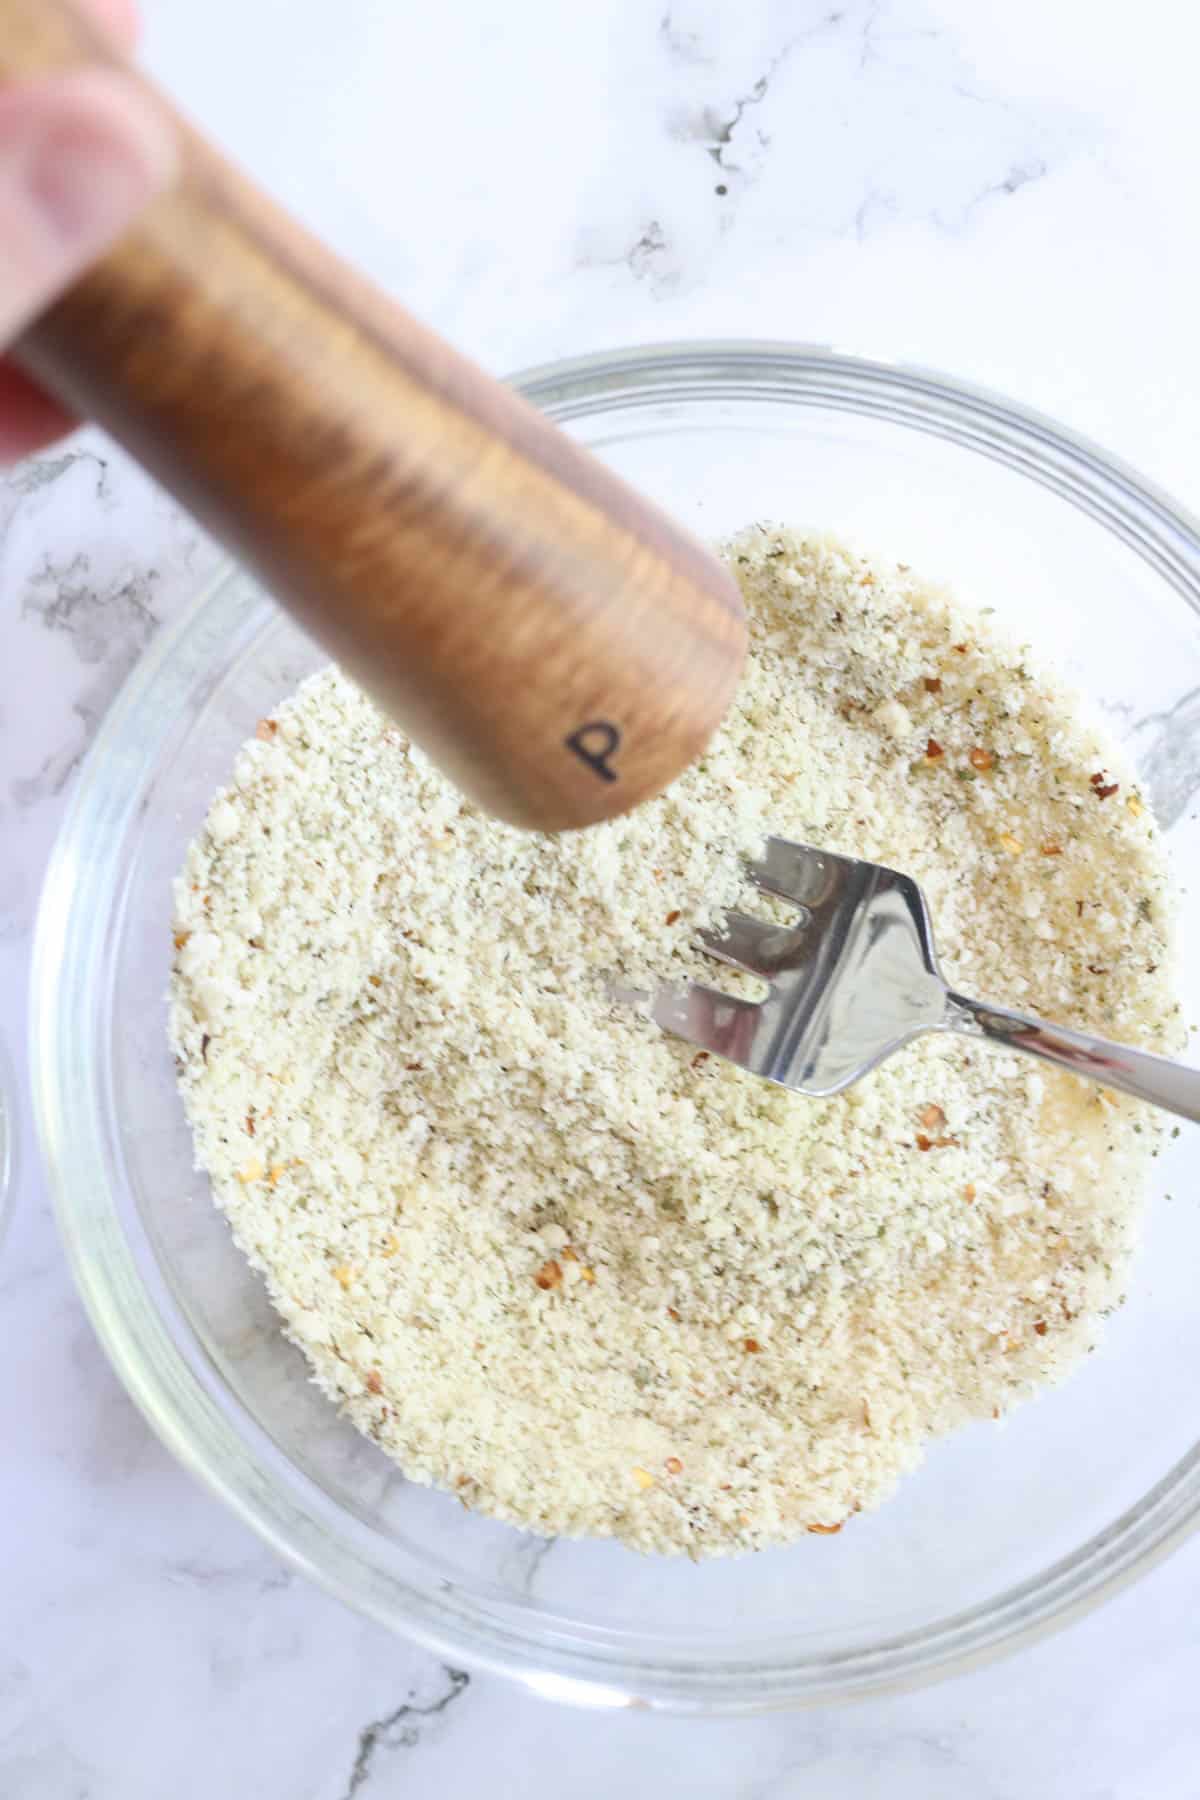 pepper added to bread crumb mixture